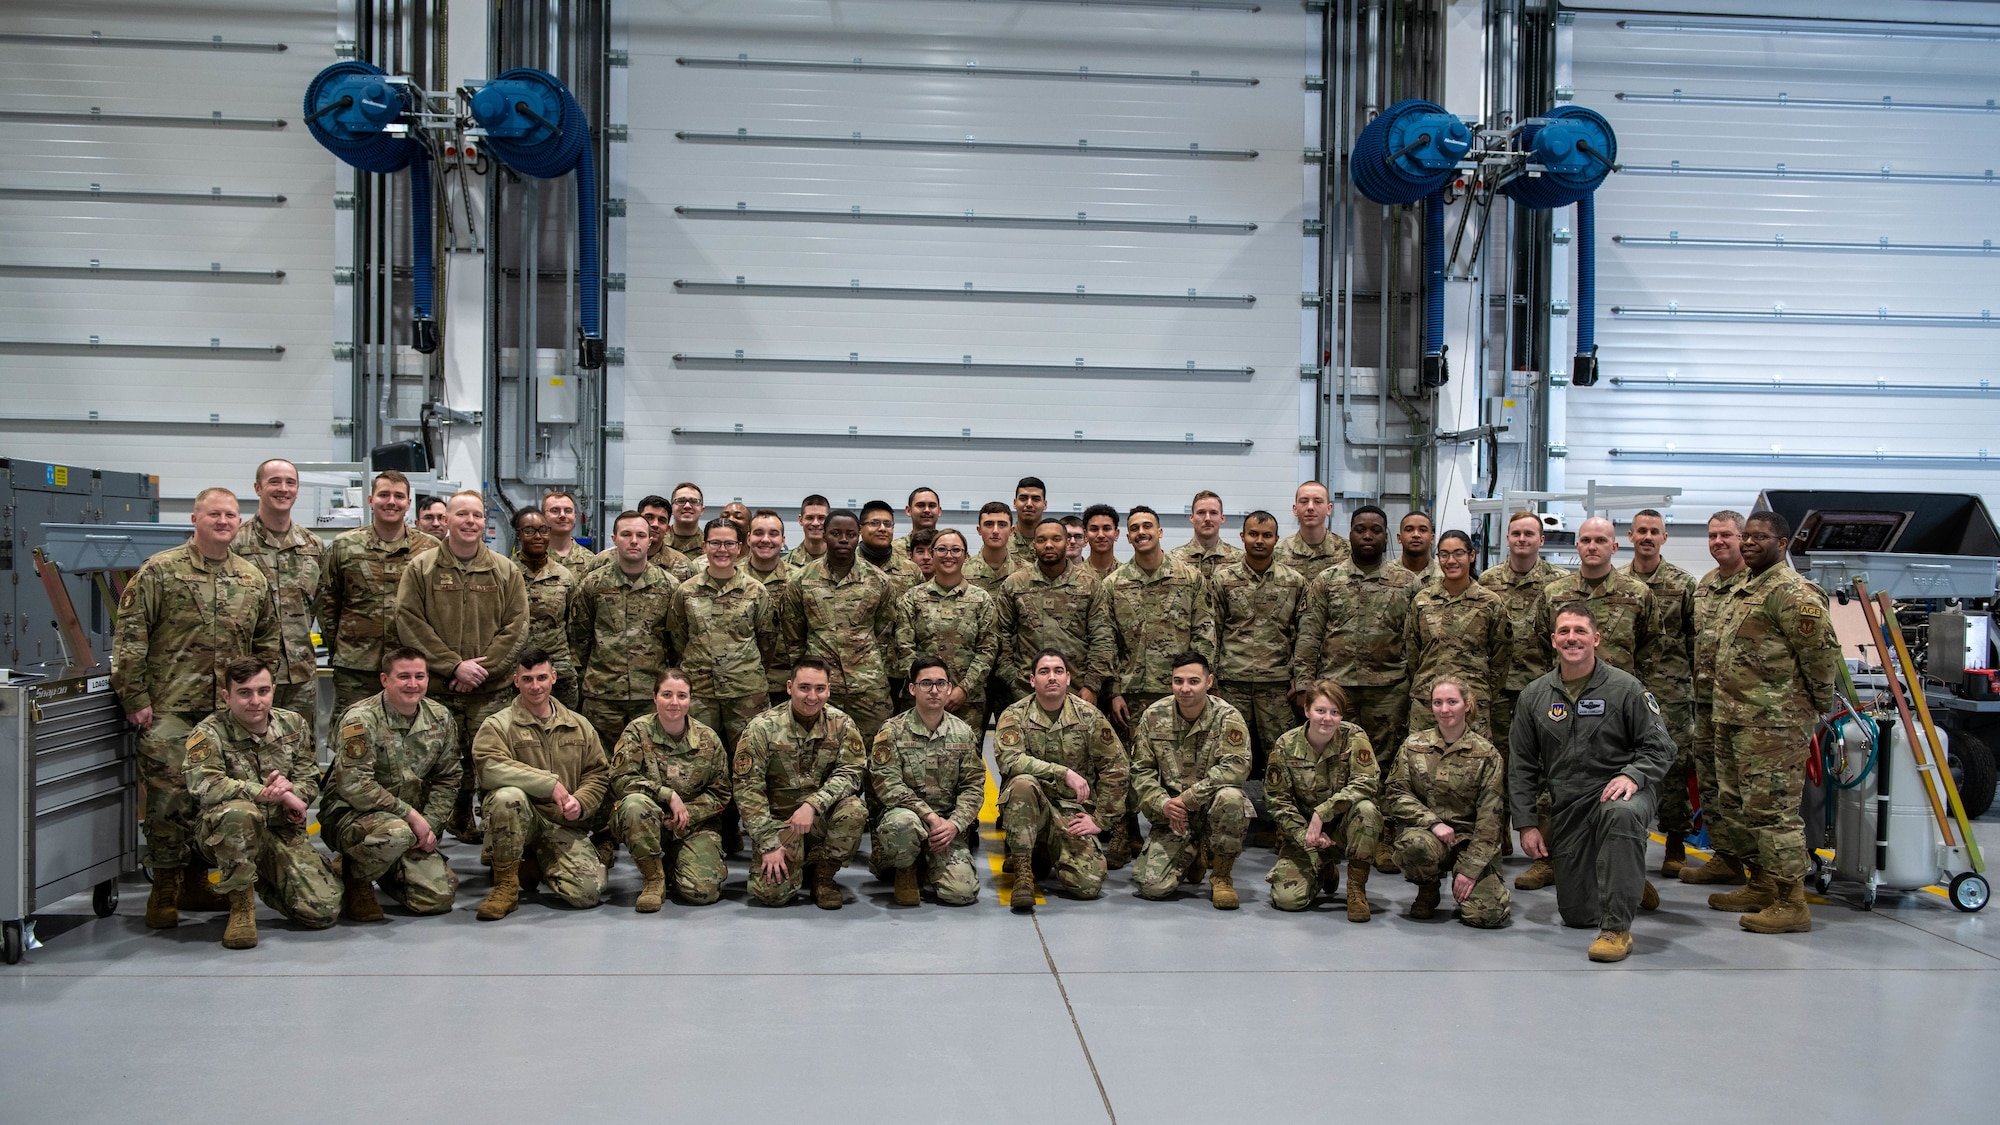 Airmen gather for a group photo after a ribbon cutting ceremony.